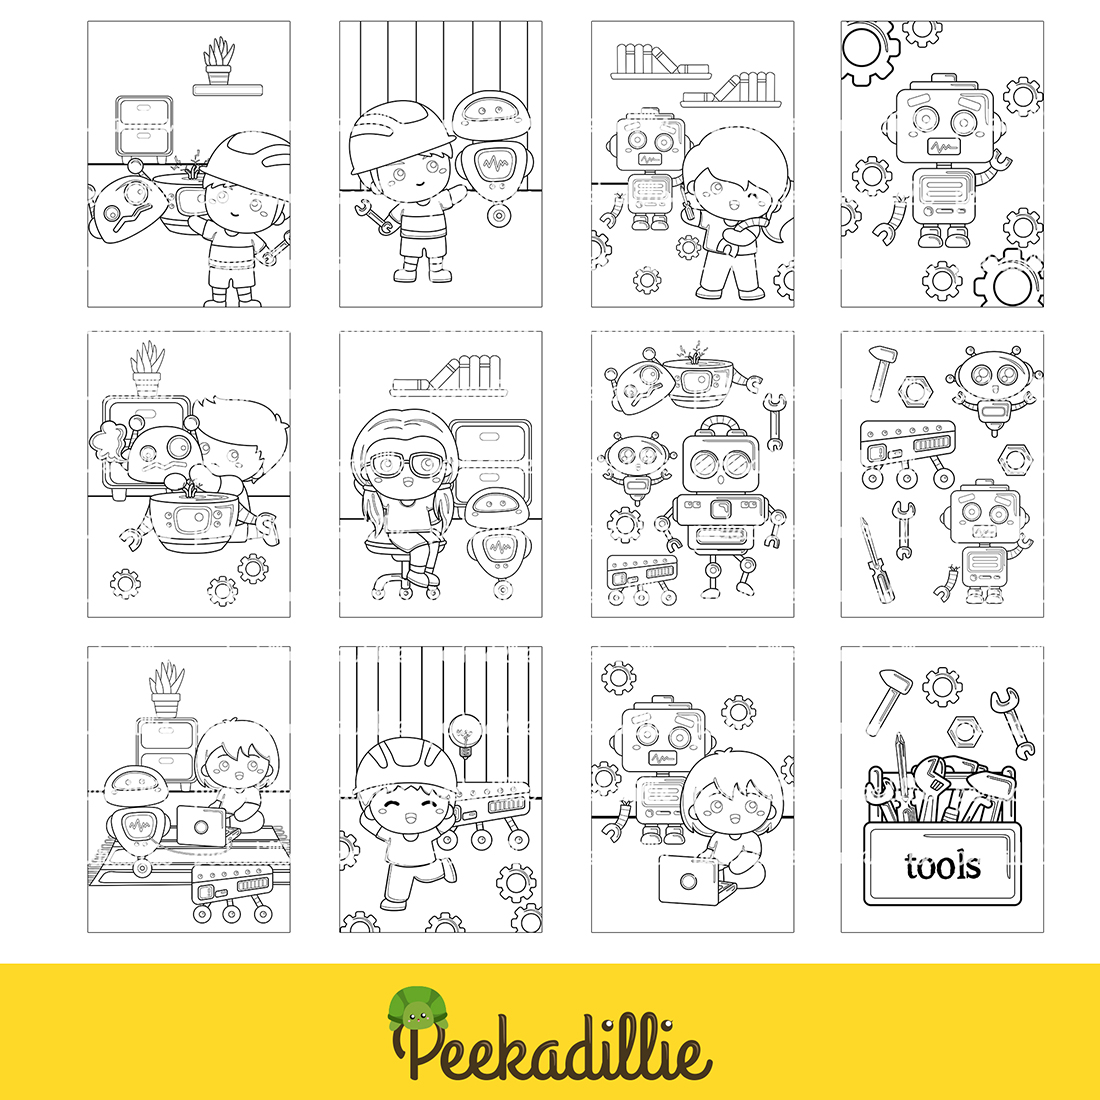 Kids Repair Robot Engineer Coloring Pages Activity For Kids And Adult preview image.